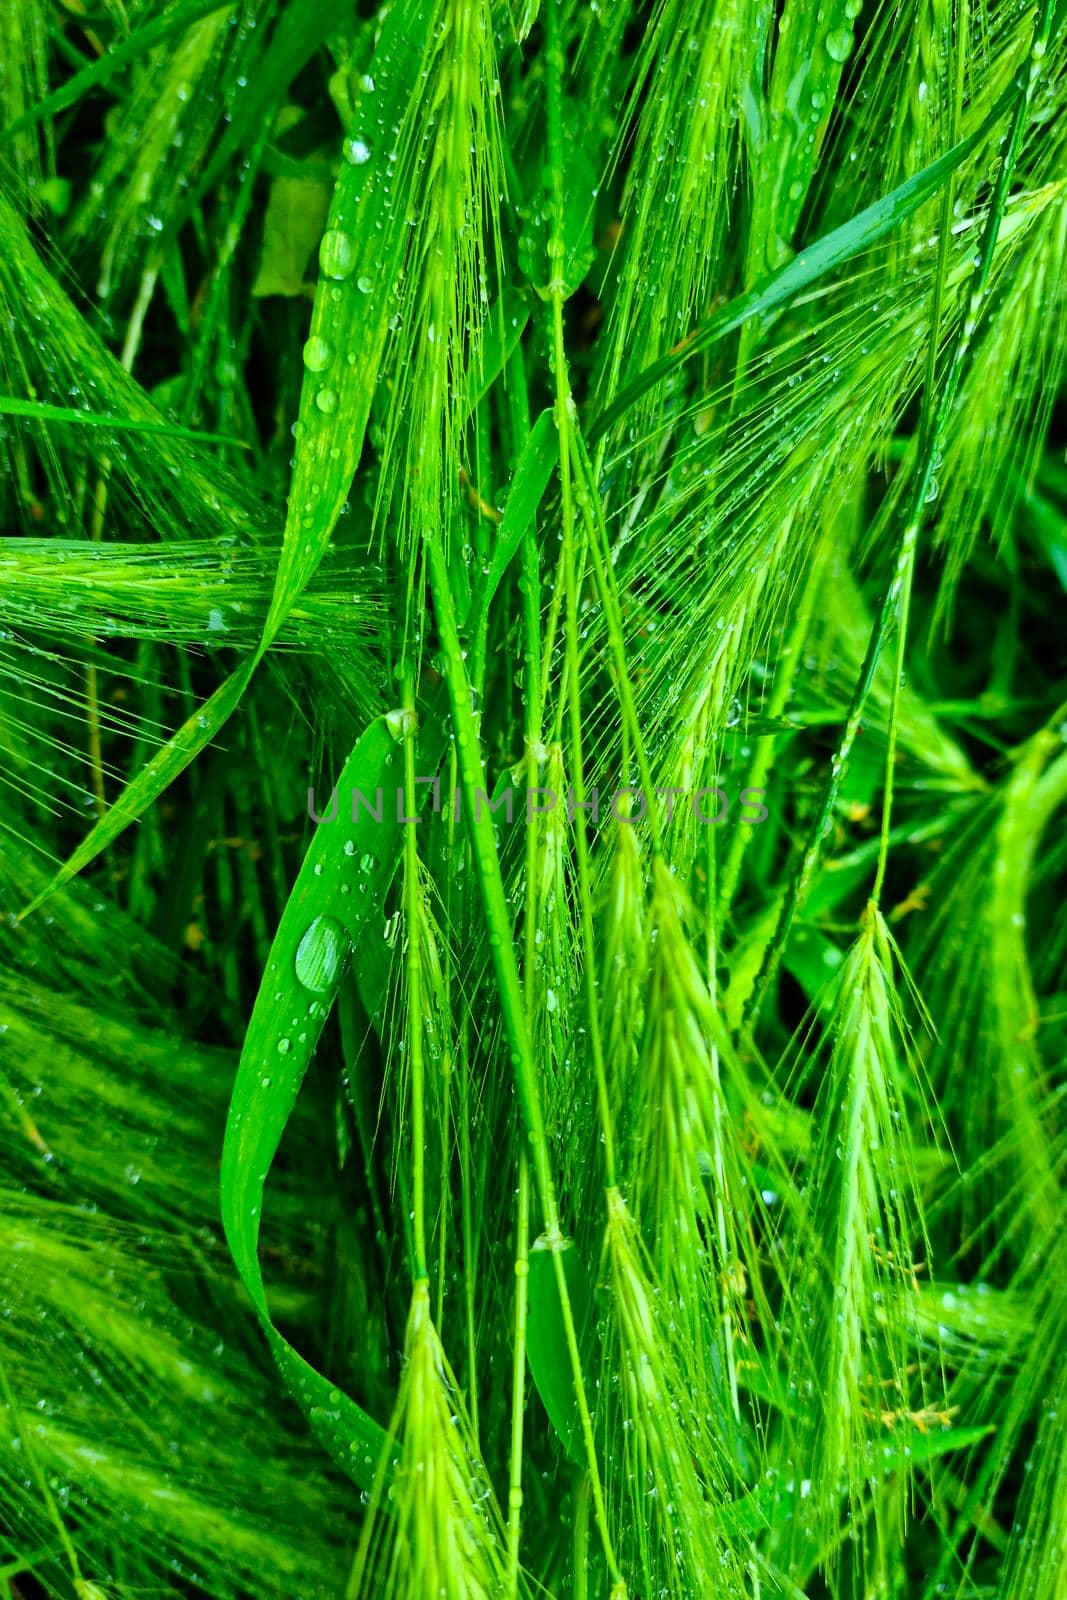 Green ears of wheat or barley with drops after rain